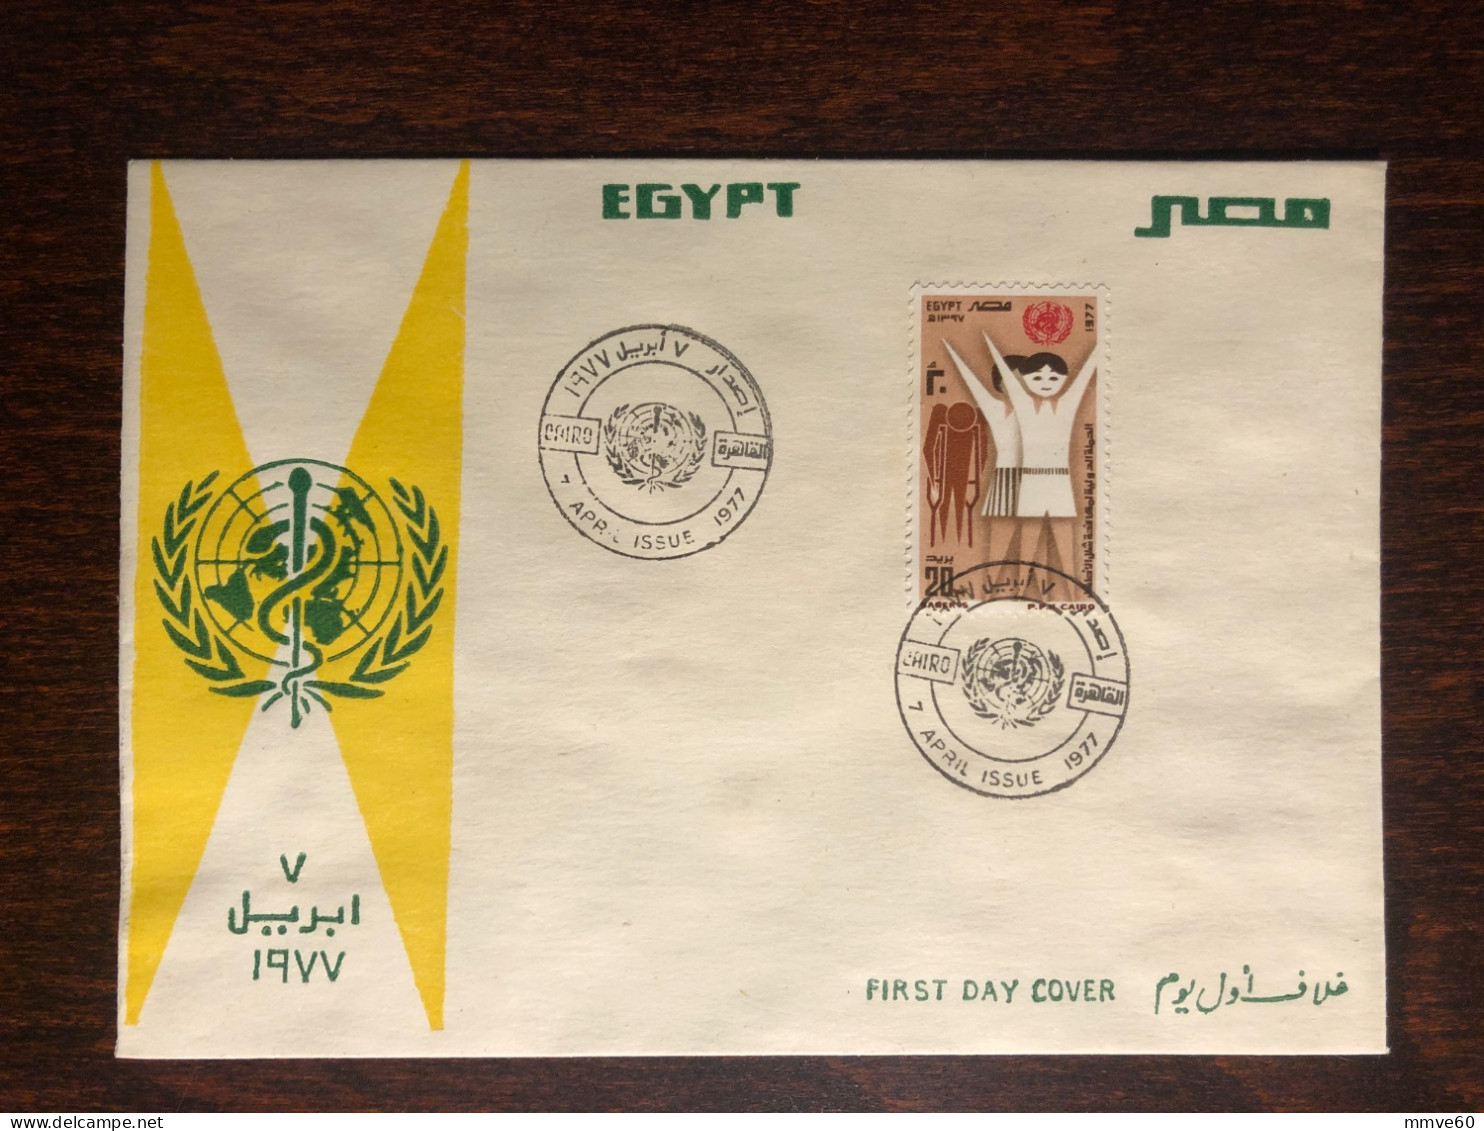 EGYPT FDC COVER 1977 YEAR DISABLED WHO HEALTH MEDICINE - Covers & Documents